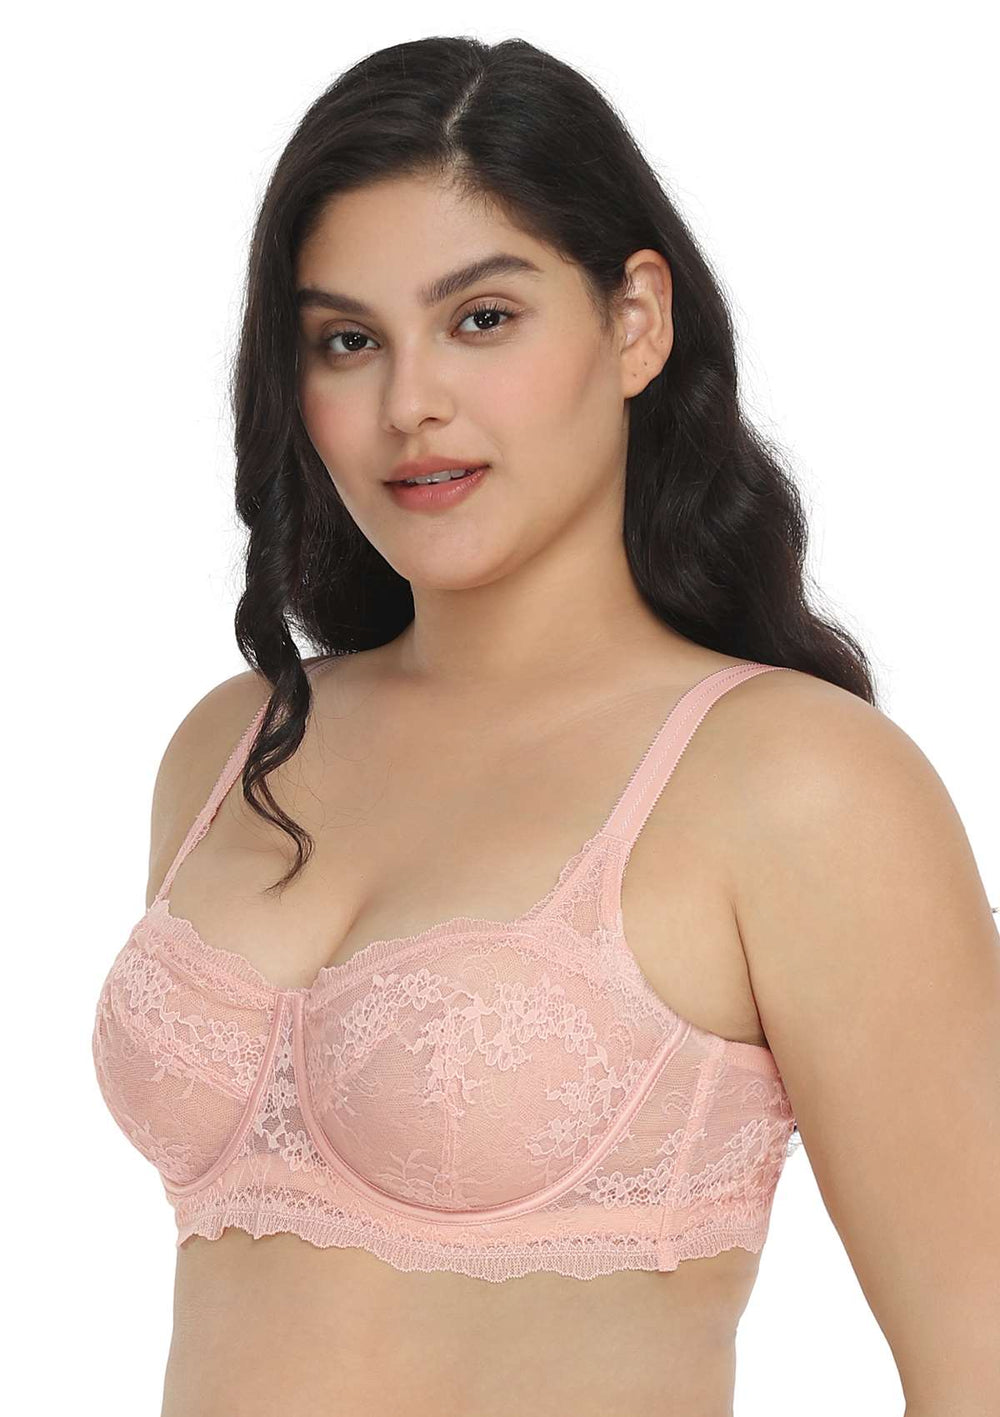 Steamy Floral Padded Lace Balconette Bra